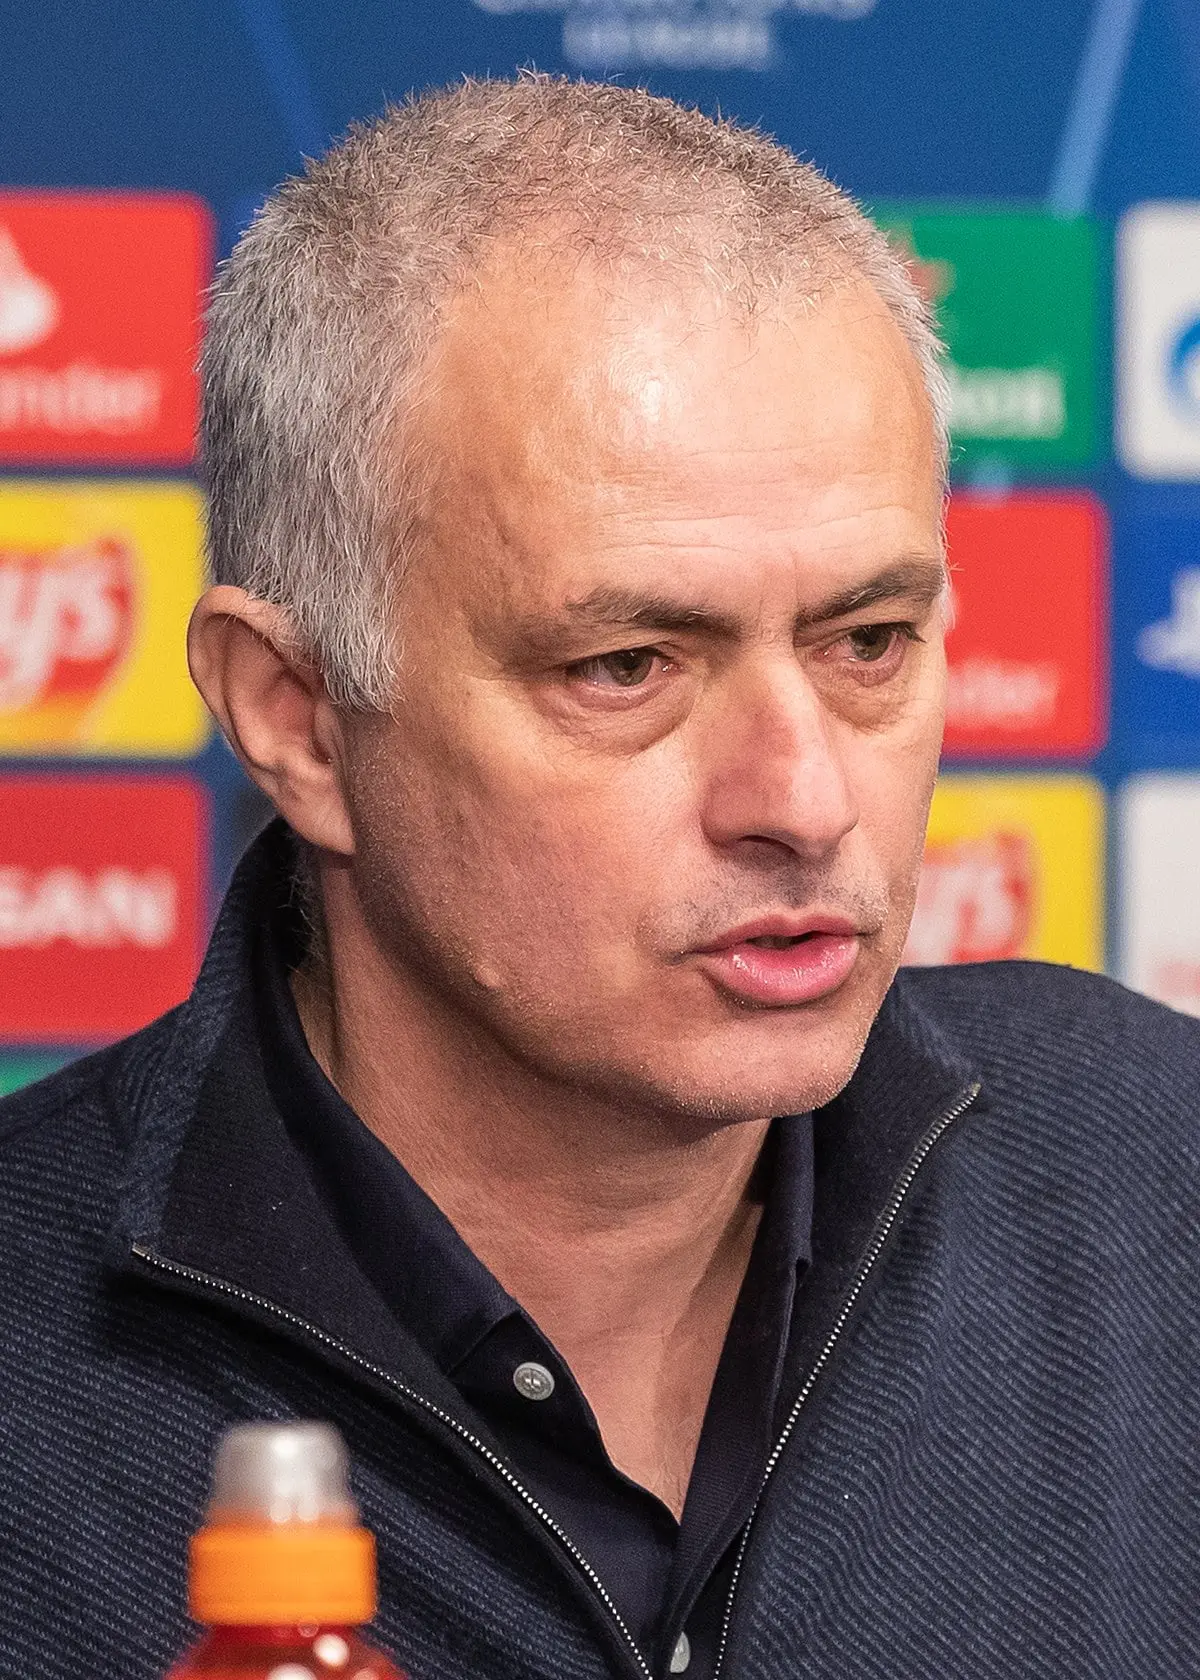 UEL: You missed chance to prove yourself – Mourinho slams Roma player after Servette draw